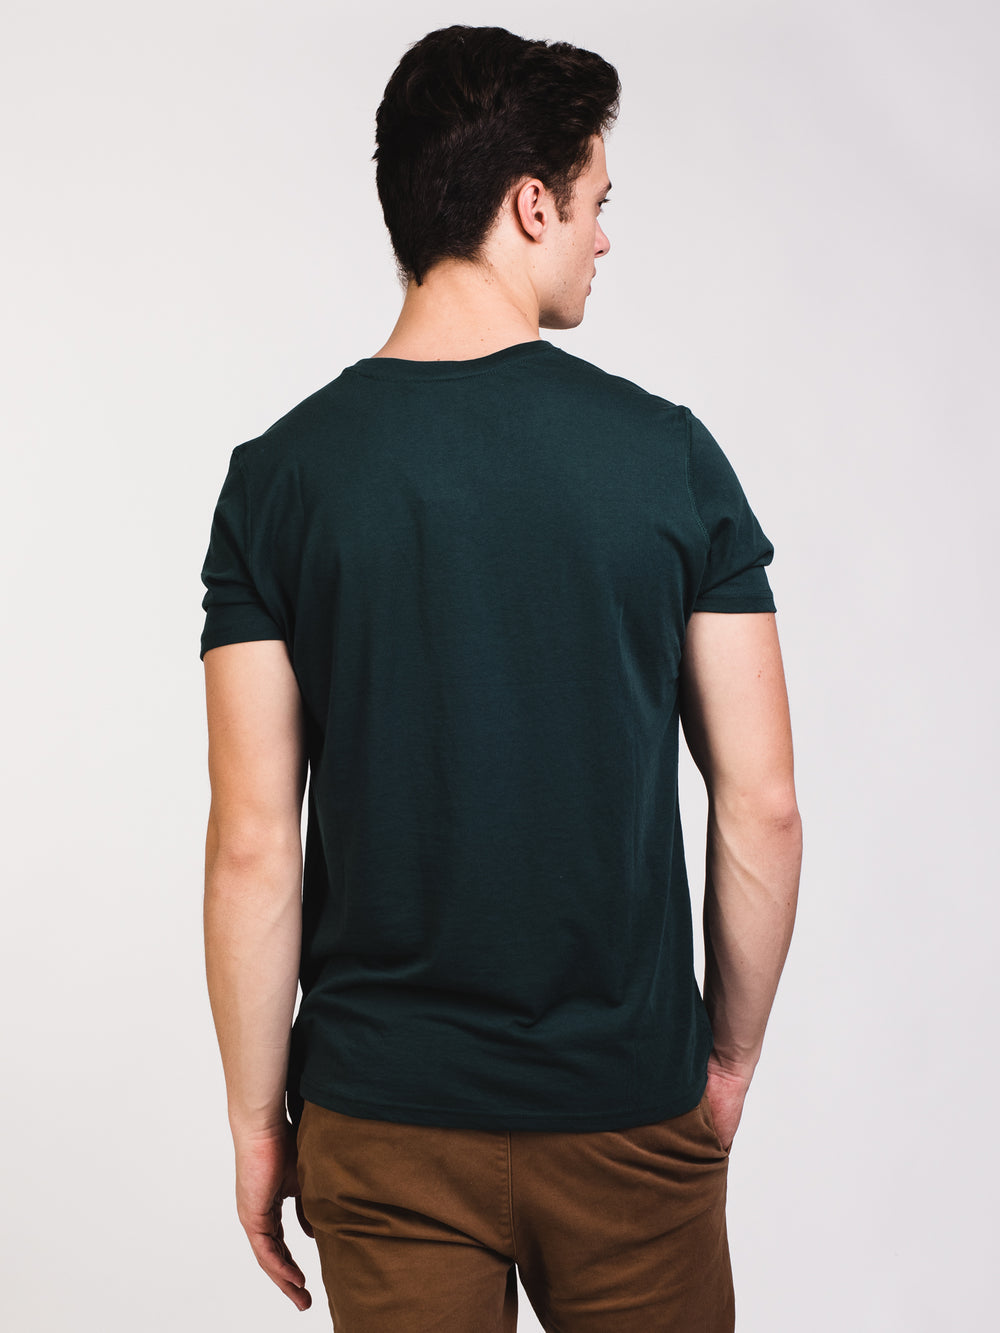 MENS VICTOR VNECK T - GREEN - CLEARANCE